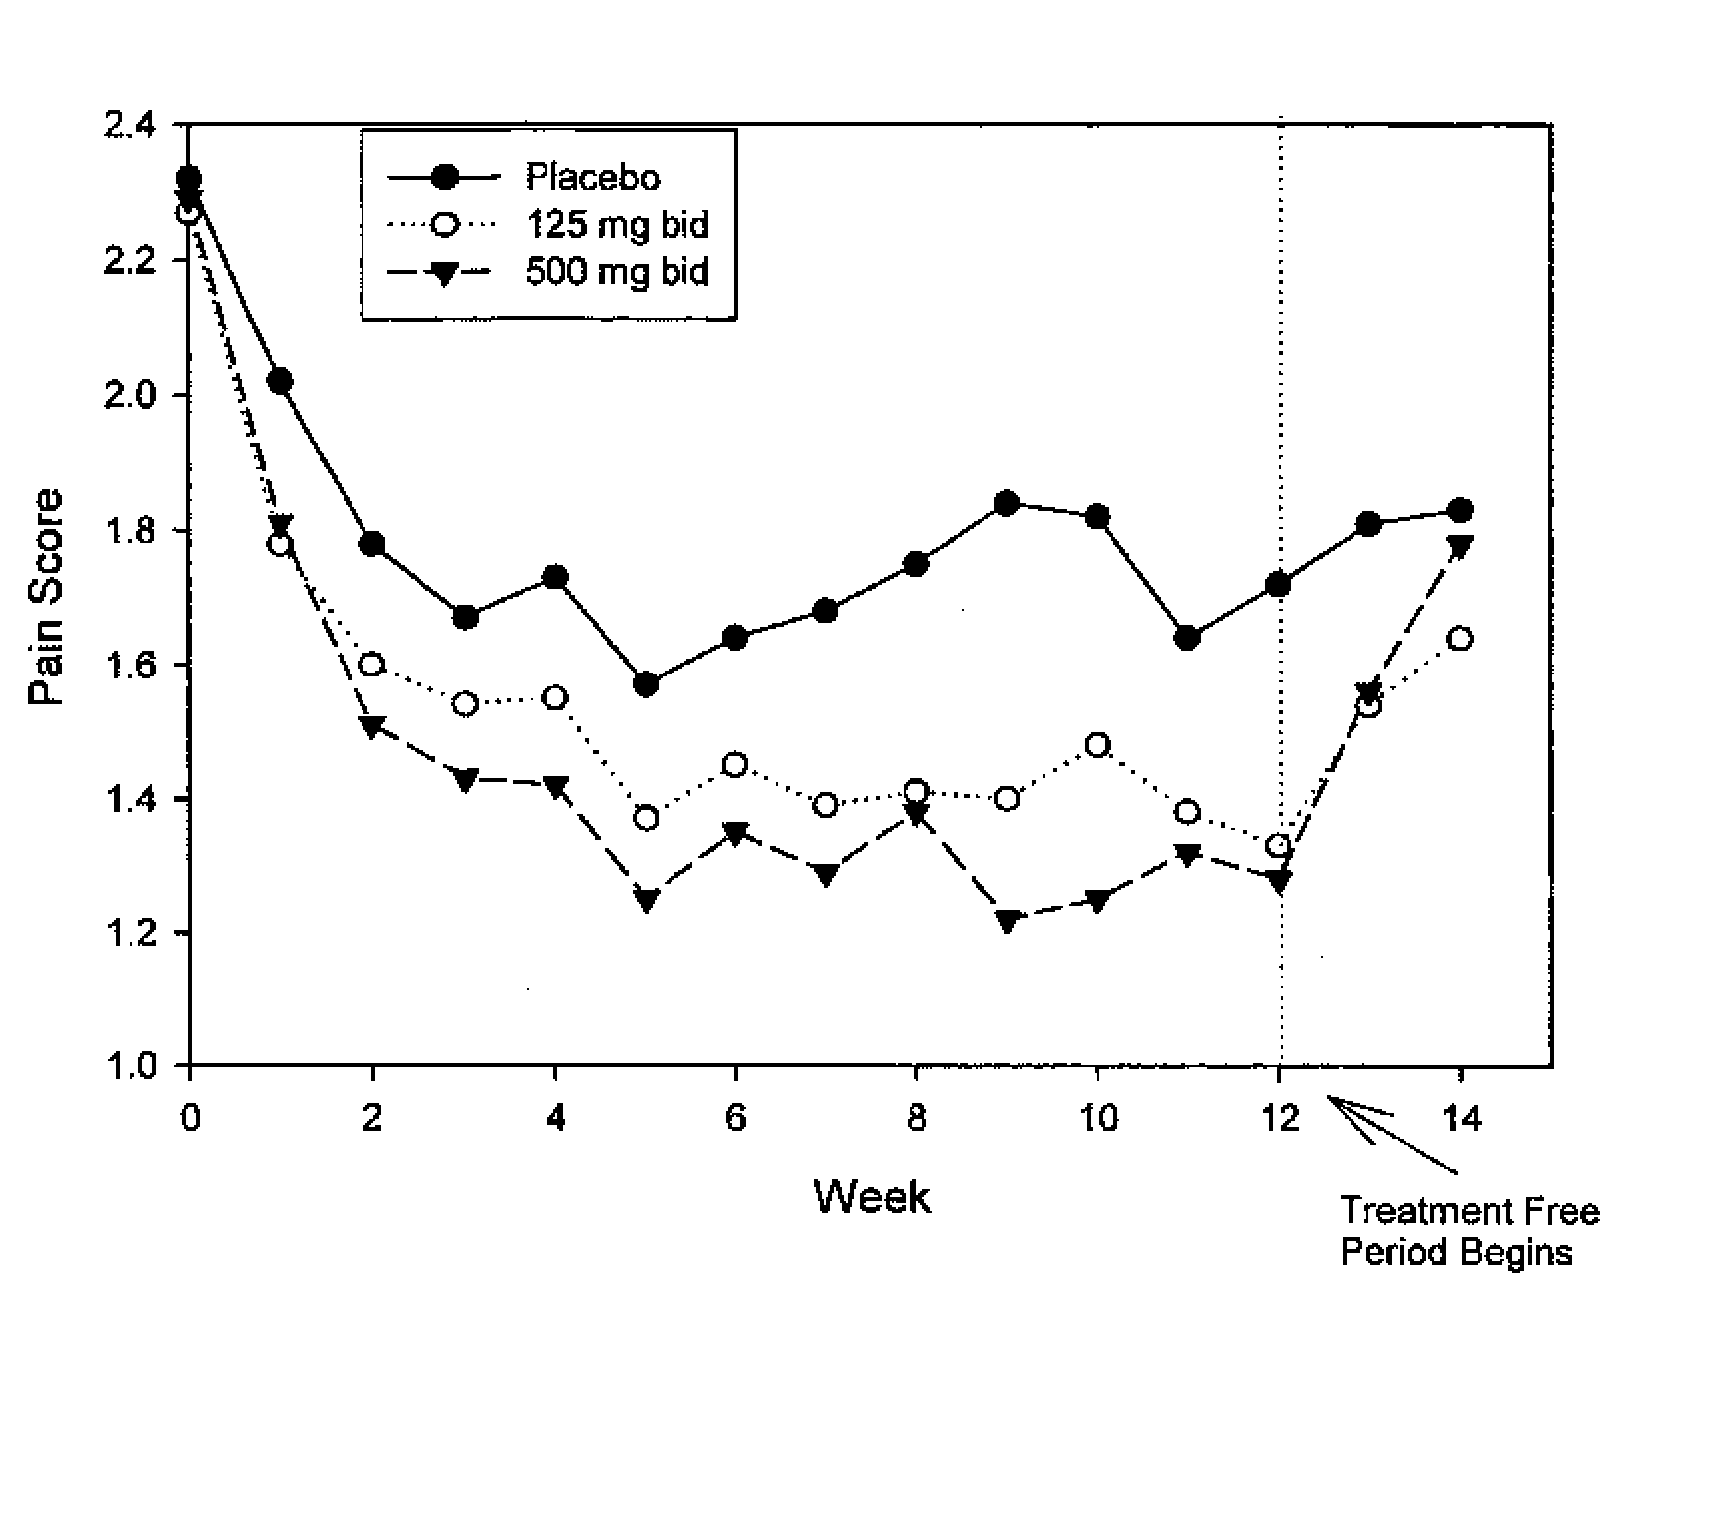 Compositions and Methods for Treating or Preventing Inflammatory Bowel Disease, Familial Adenomatous Polyposis and Colon Cancer